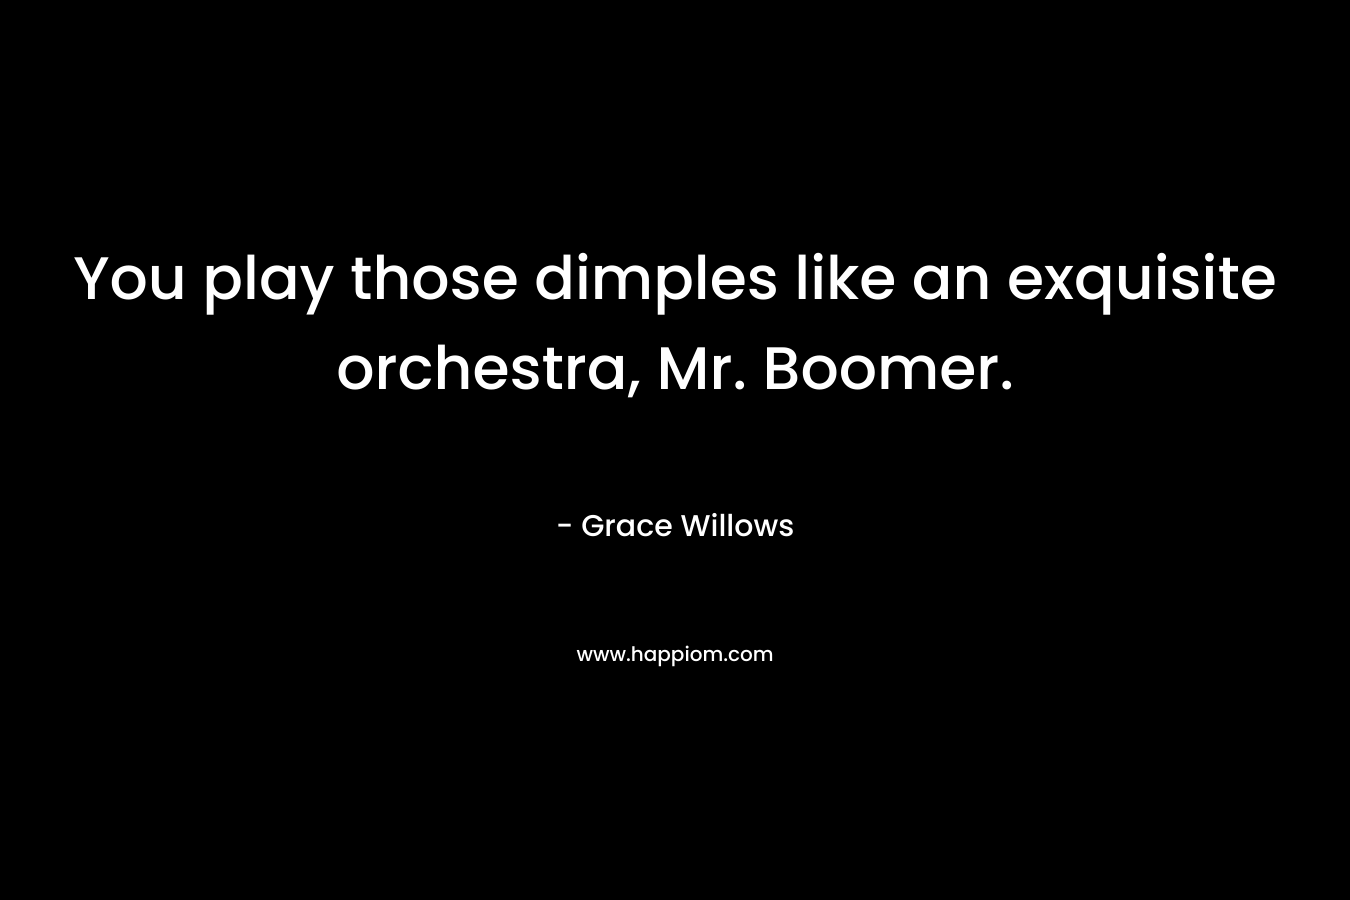 You play those dimples like an exquisite orchestra, Mr. Boomer. – Grace Willows